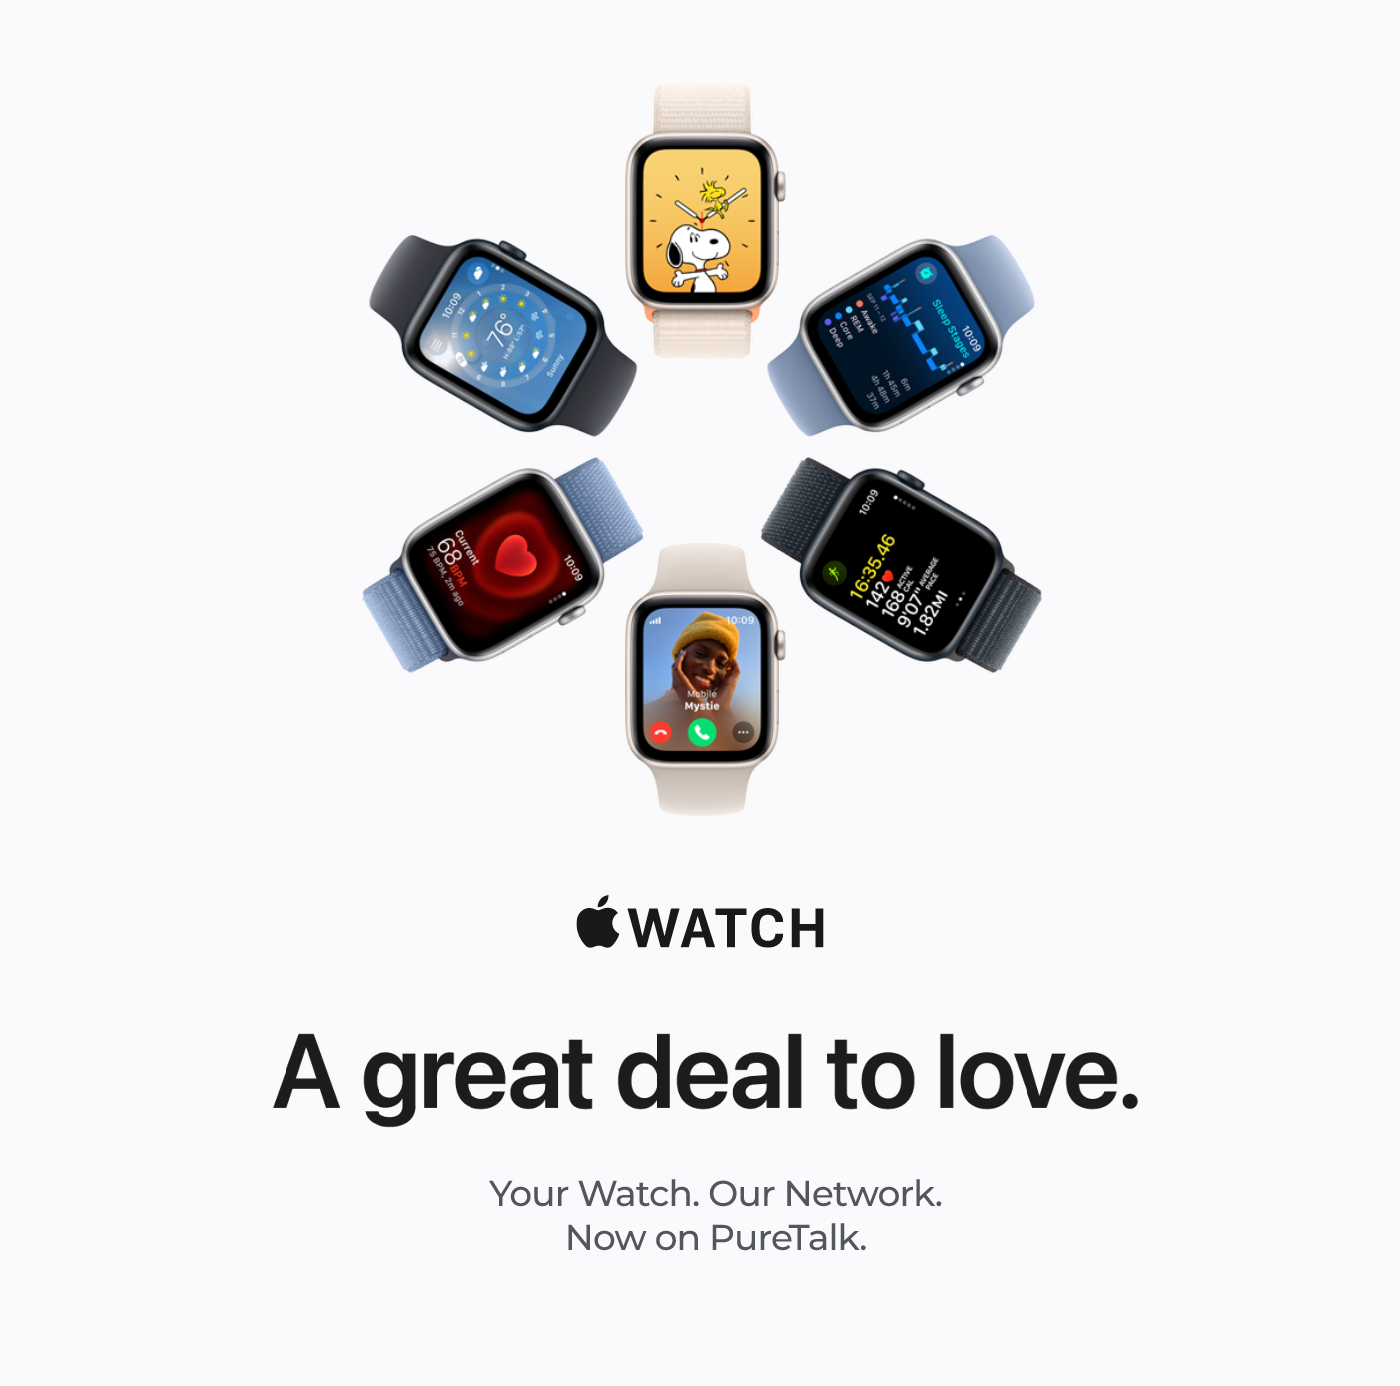 Apple Watch - A great deal to love. Your Watch. Now on PureTalk.